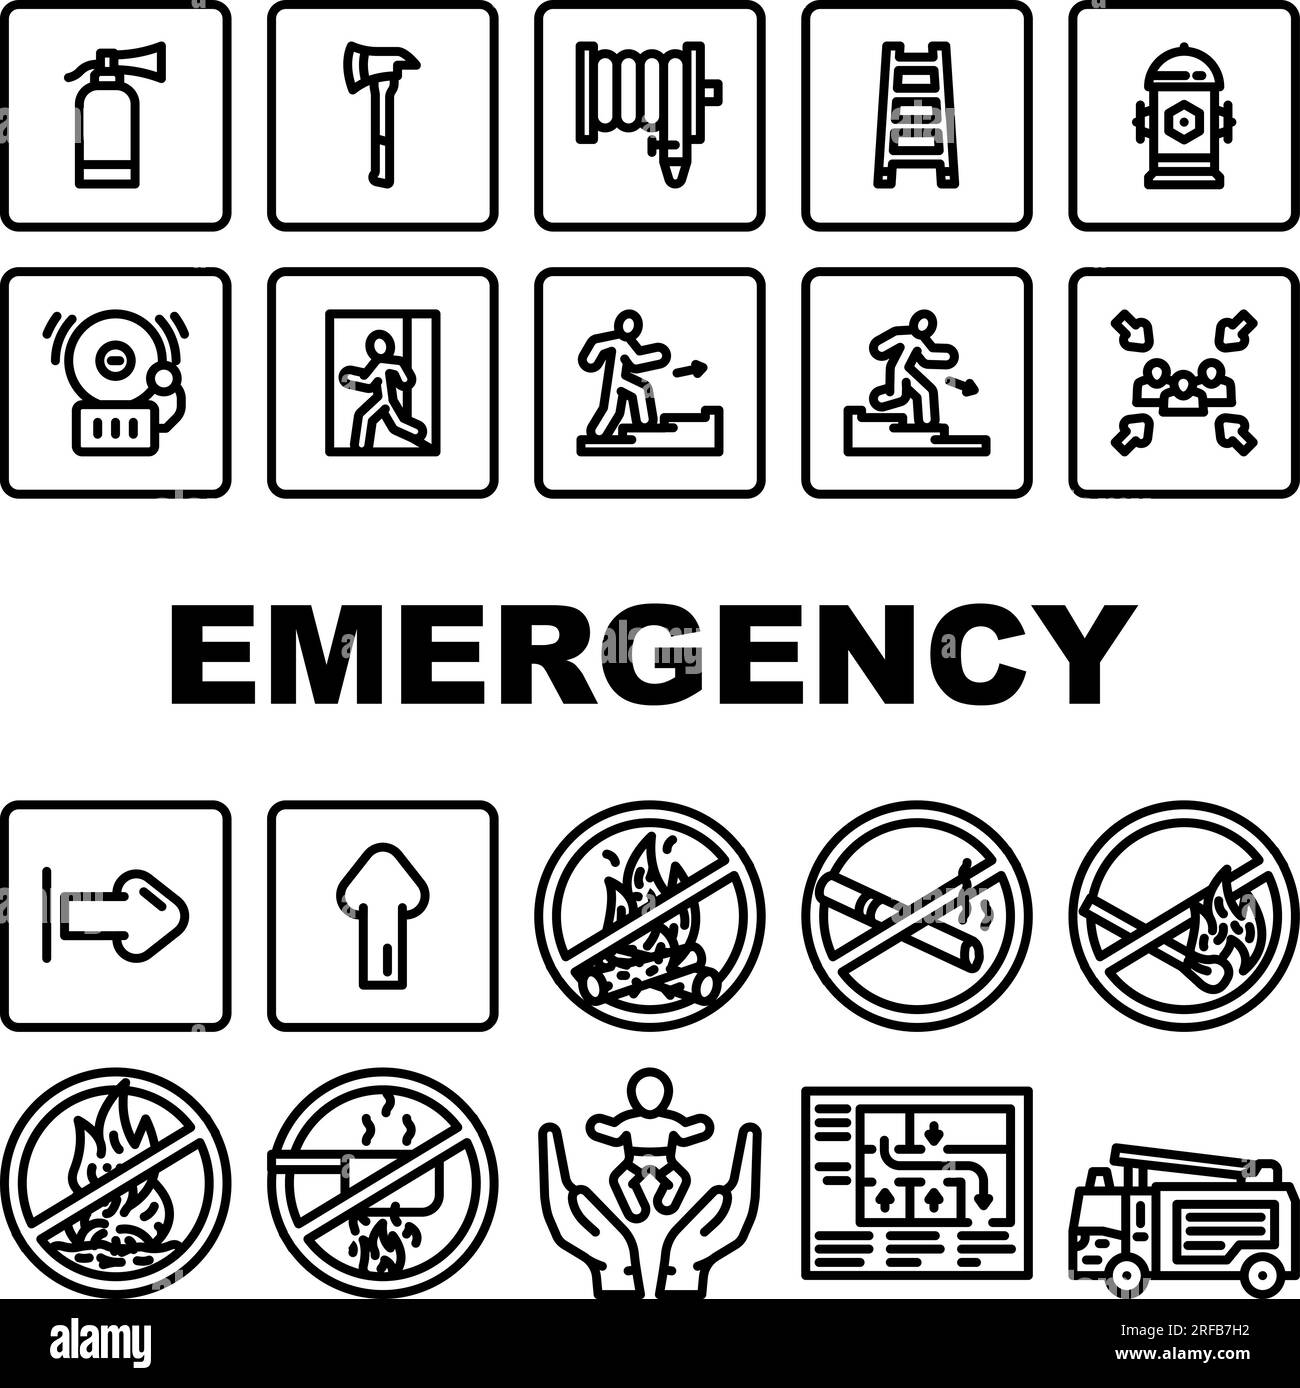 emergency fire exit safety escape icons set vector Stock Vector